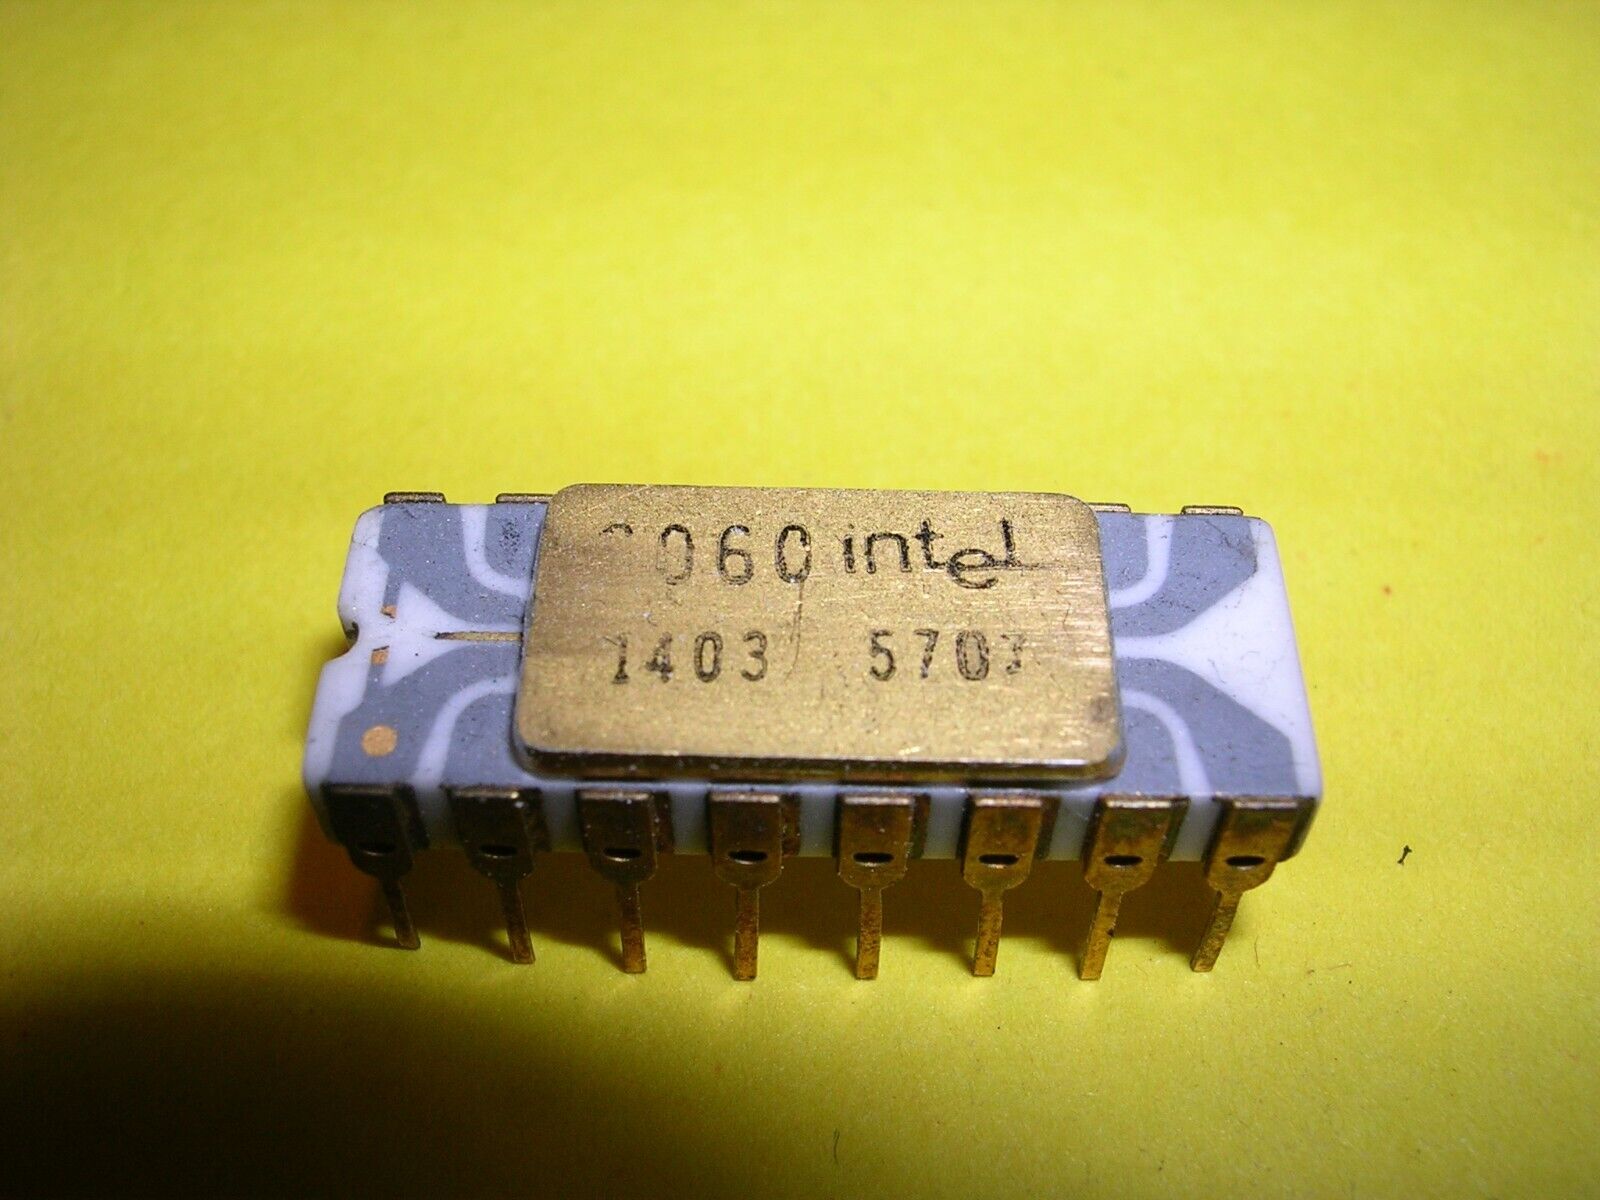 Intel 1403 (C1403) - Extremely Rare - Only a Couple Known to Exist